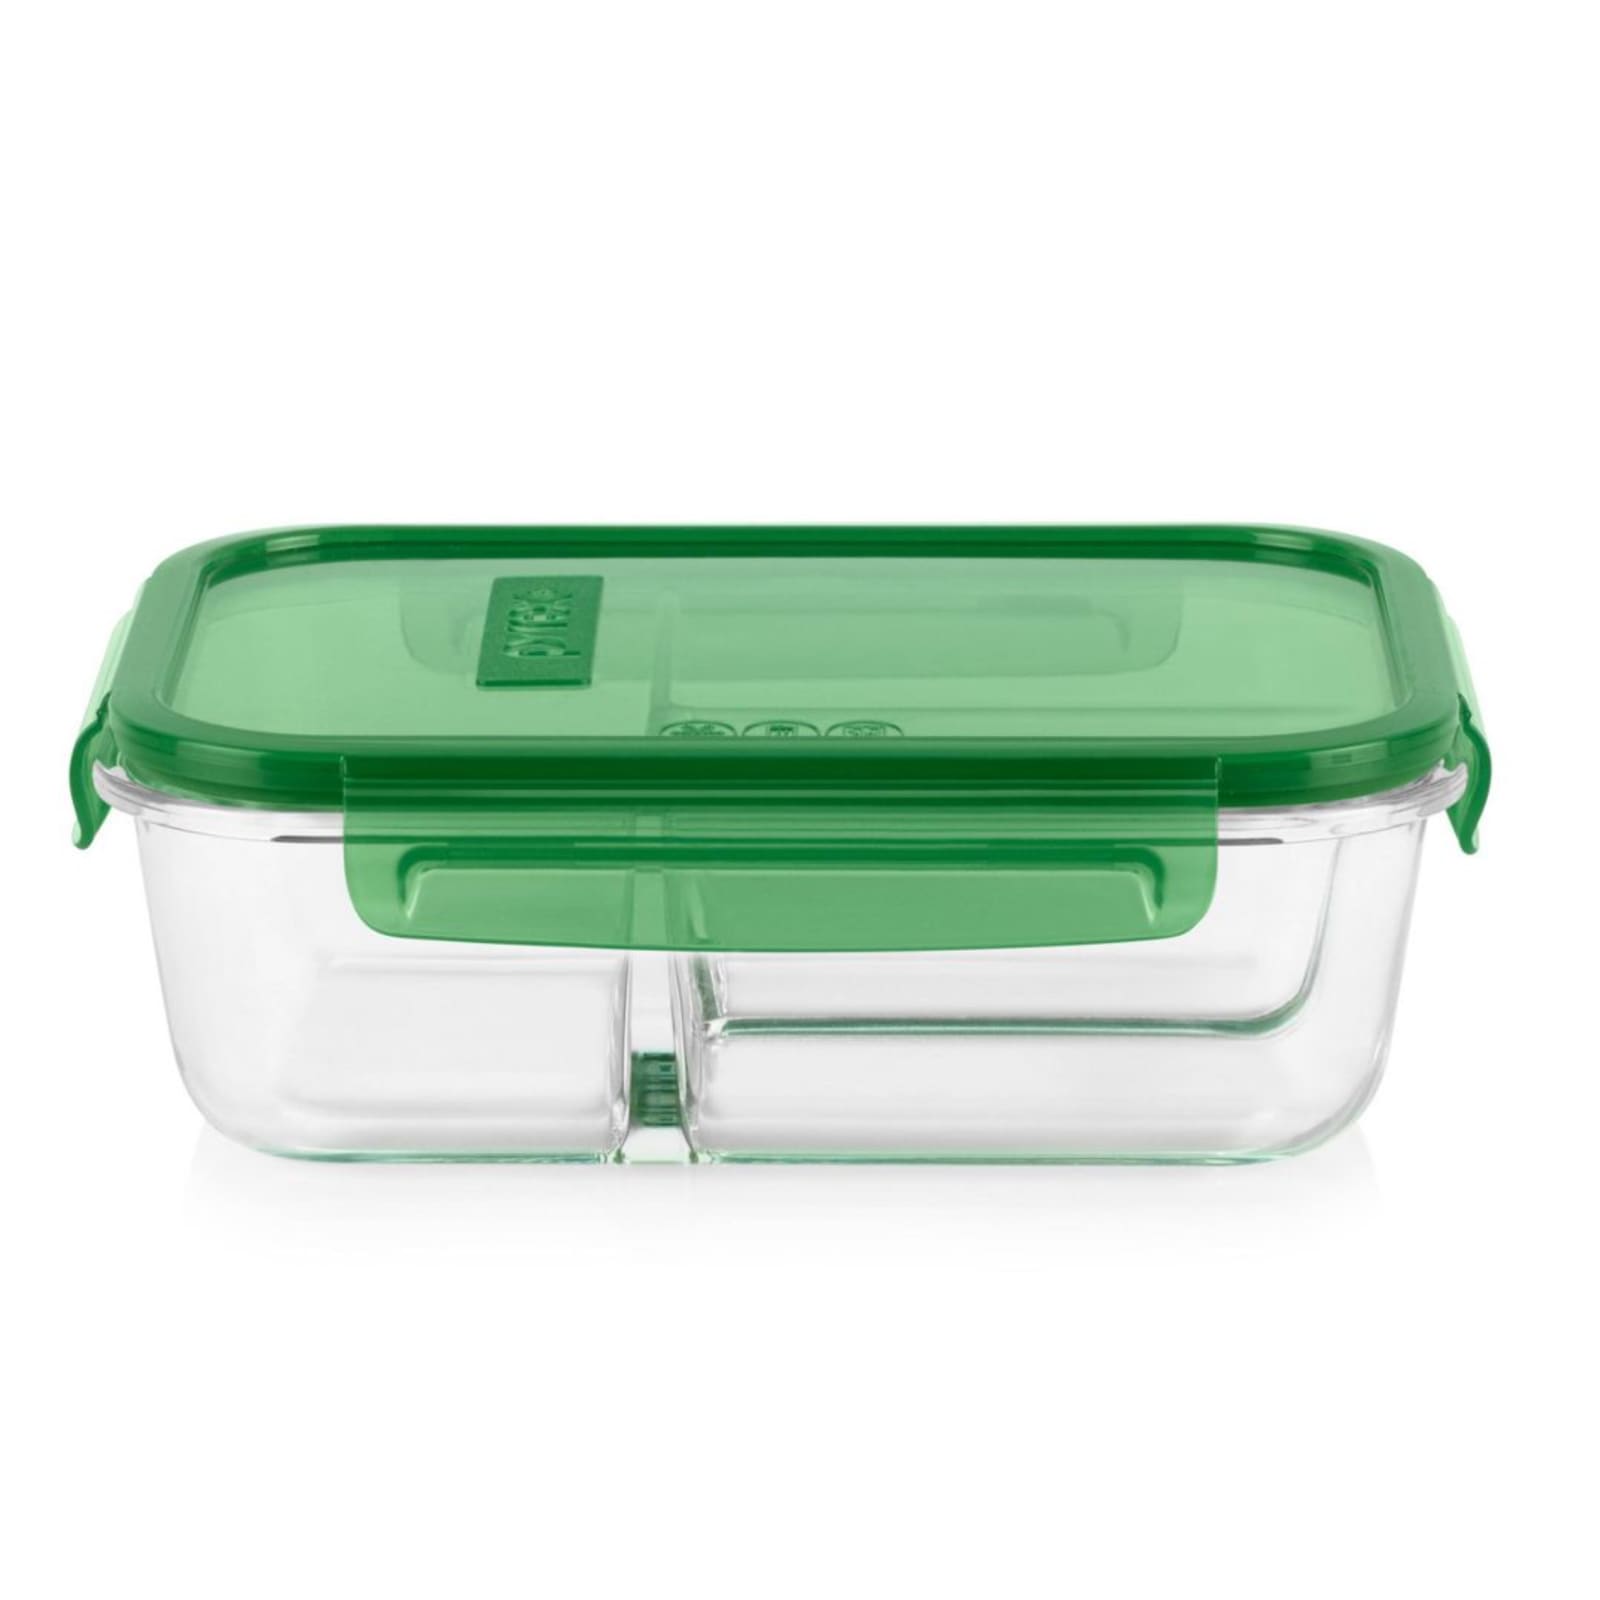 3-Cup Rectangular Storage Dish With Lid by Pyrex at Fleet Farm